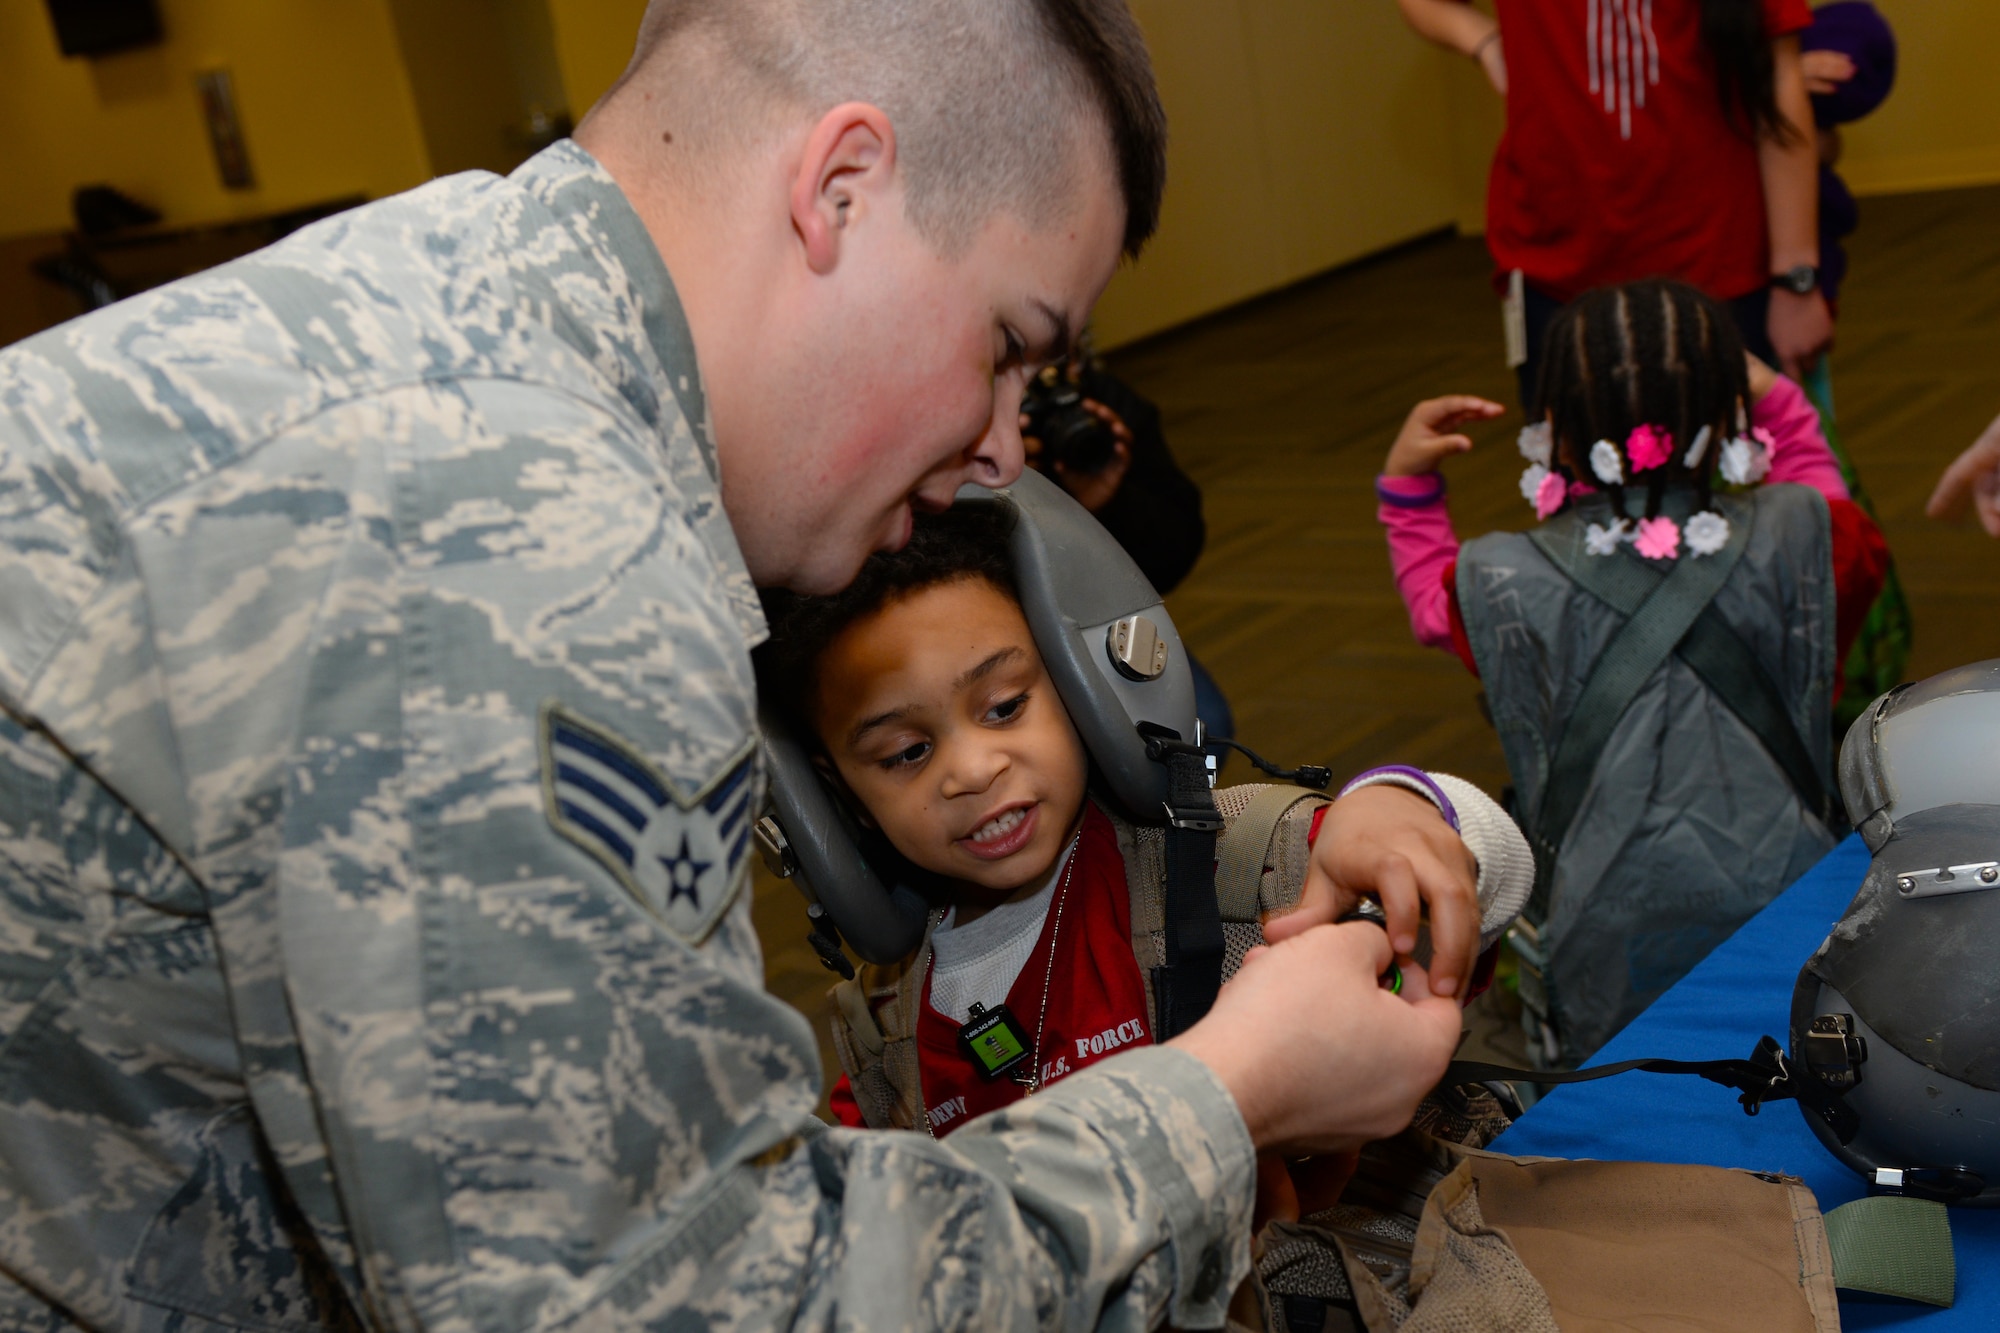 Senior Airman Cole Barnhart, a 28th Operations Support Squadron aircrew flight equipment technician, shows a child a compass during a kids deployment line at Ellsworth Air Force Base, S.D., April 7, 2018. Planning for this event took over three months of coordination with numerous base agencies. (U.S. Air Force photo by Airman 1st Class Nicolas Z. Erwin)